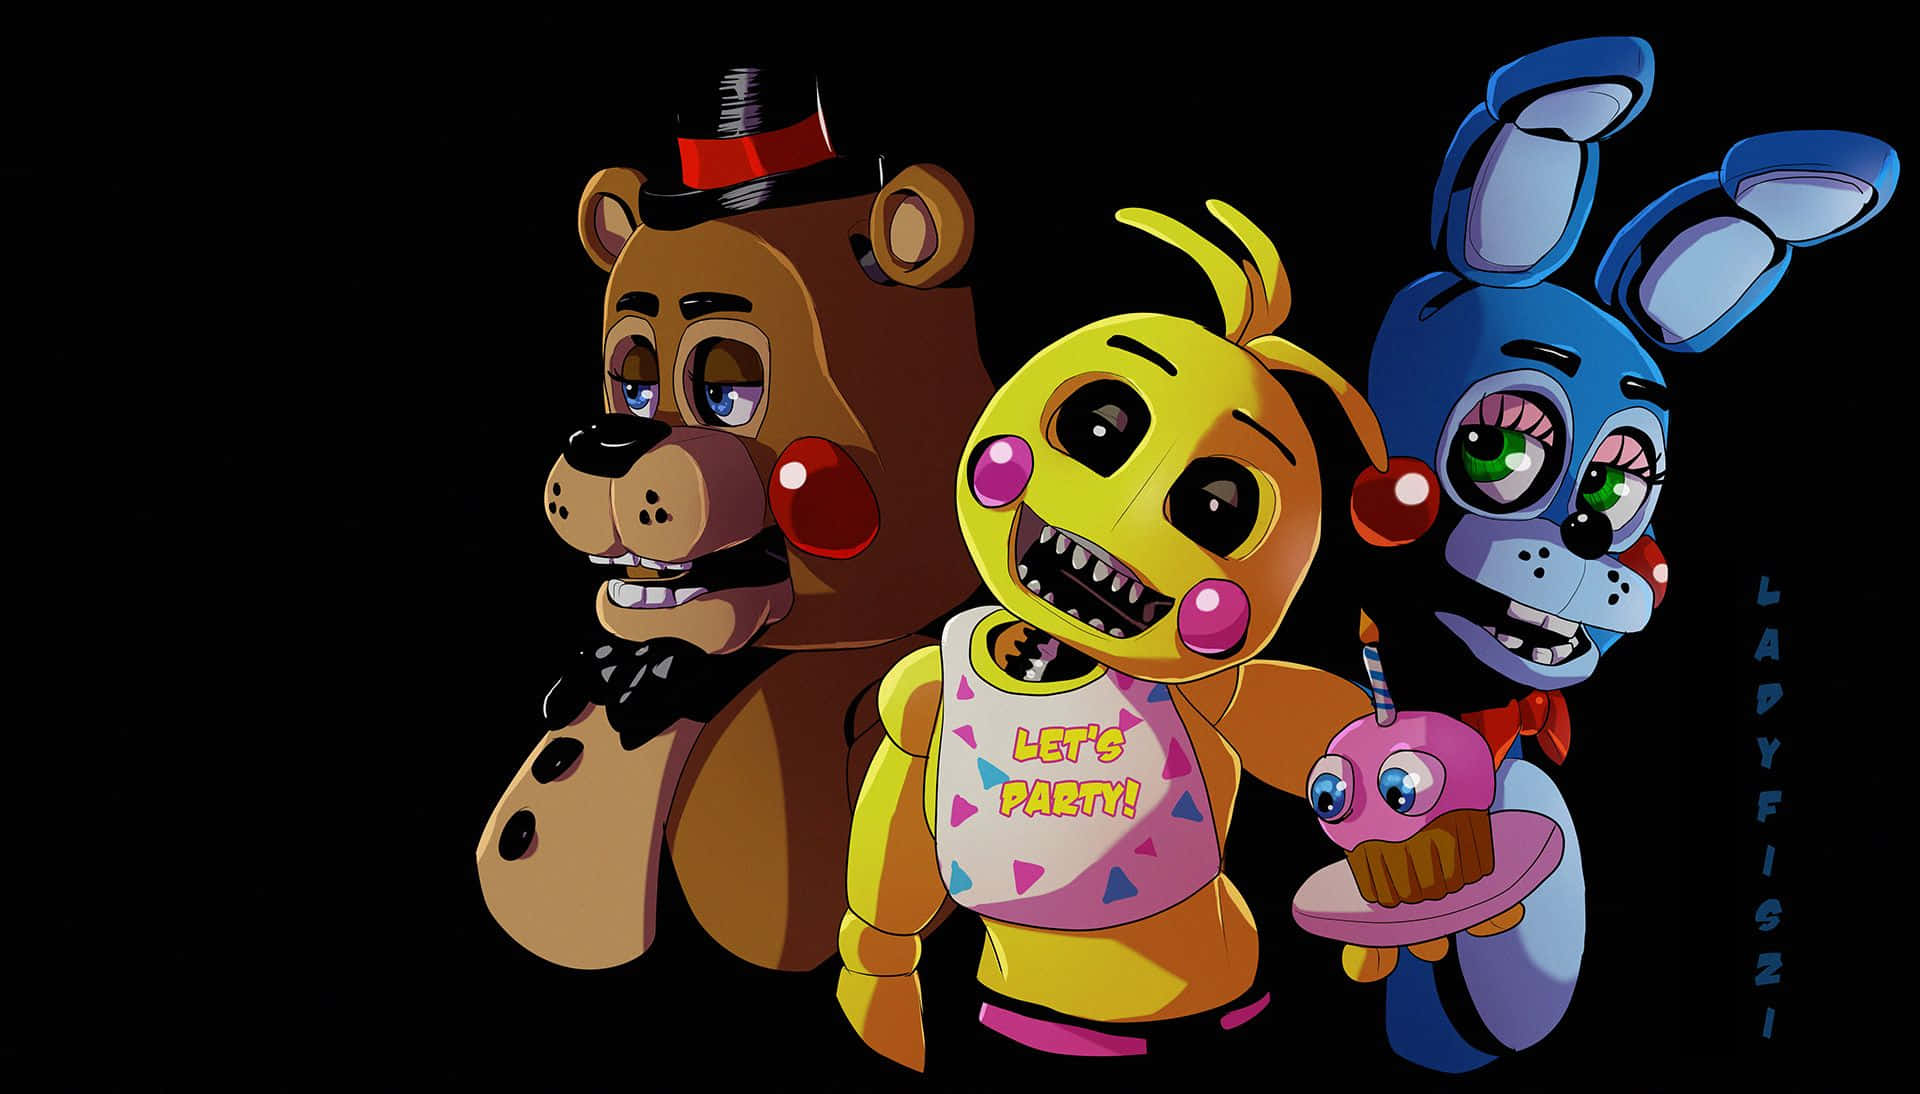 Toy Bonnie smiles for its fans Wallpaper